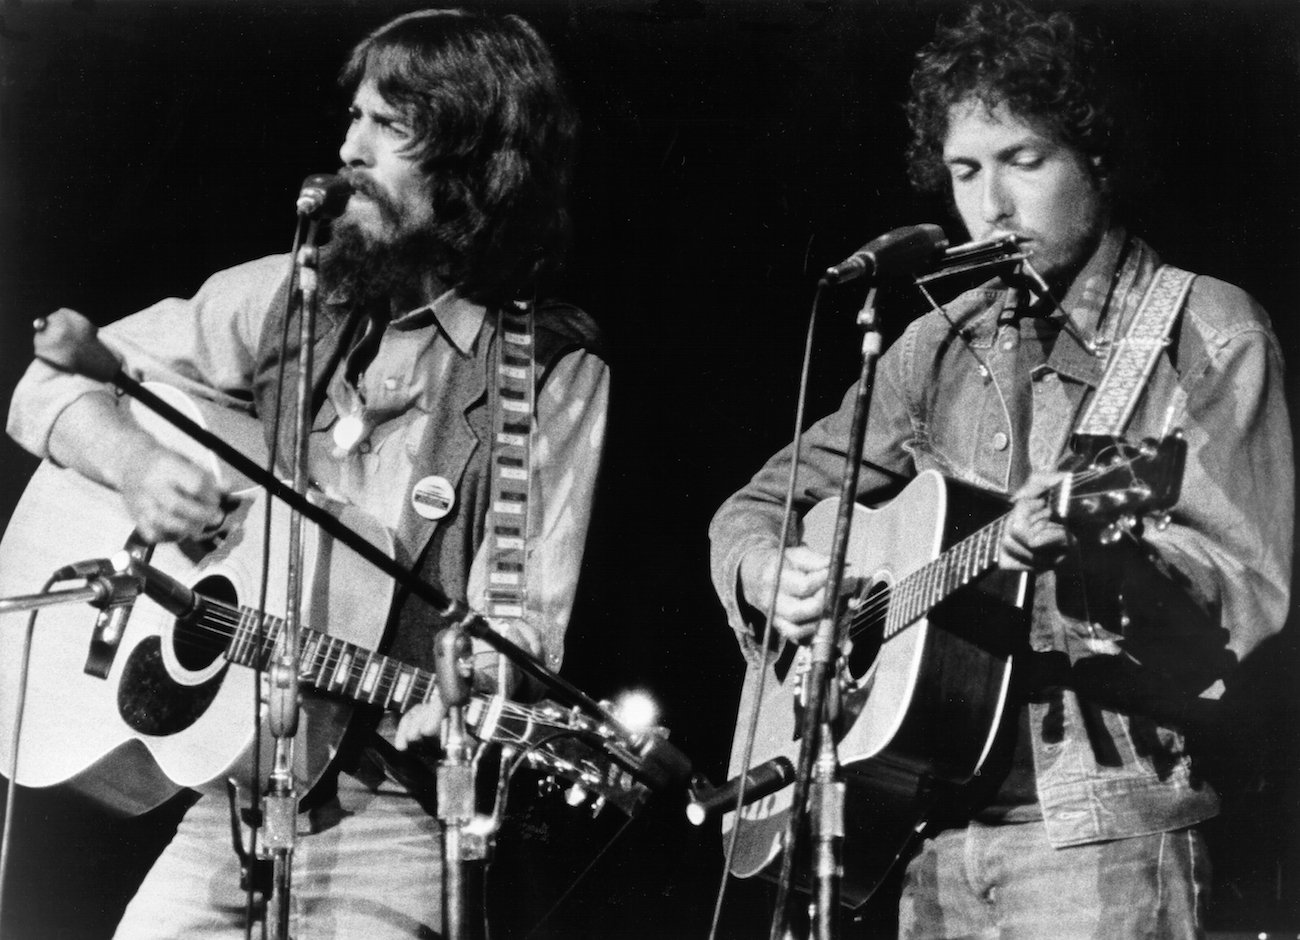 George Harrison Thought It Was Good That Bob Dylan Took a Break From Music in the Late 1960s